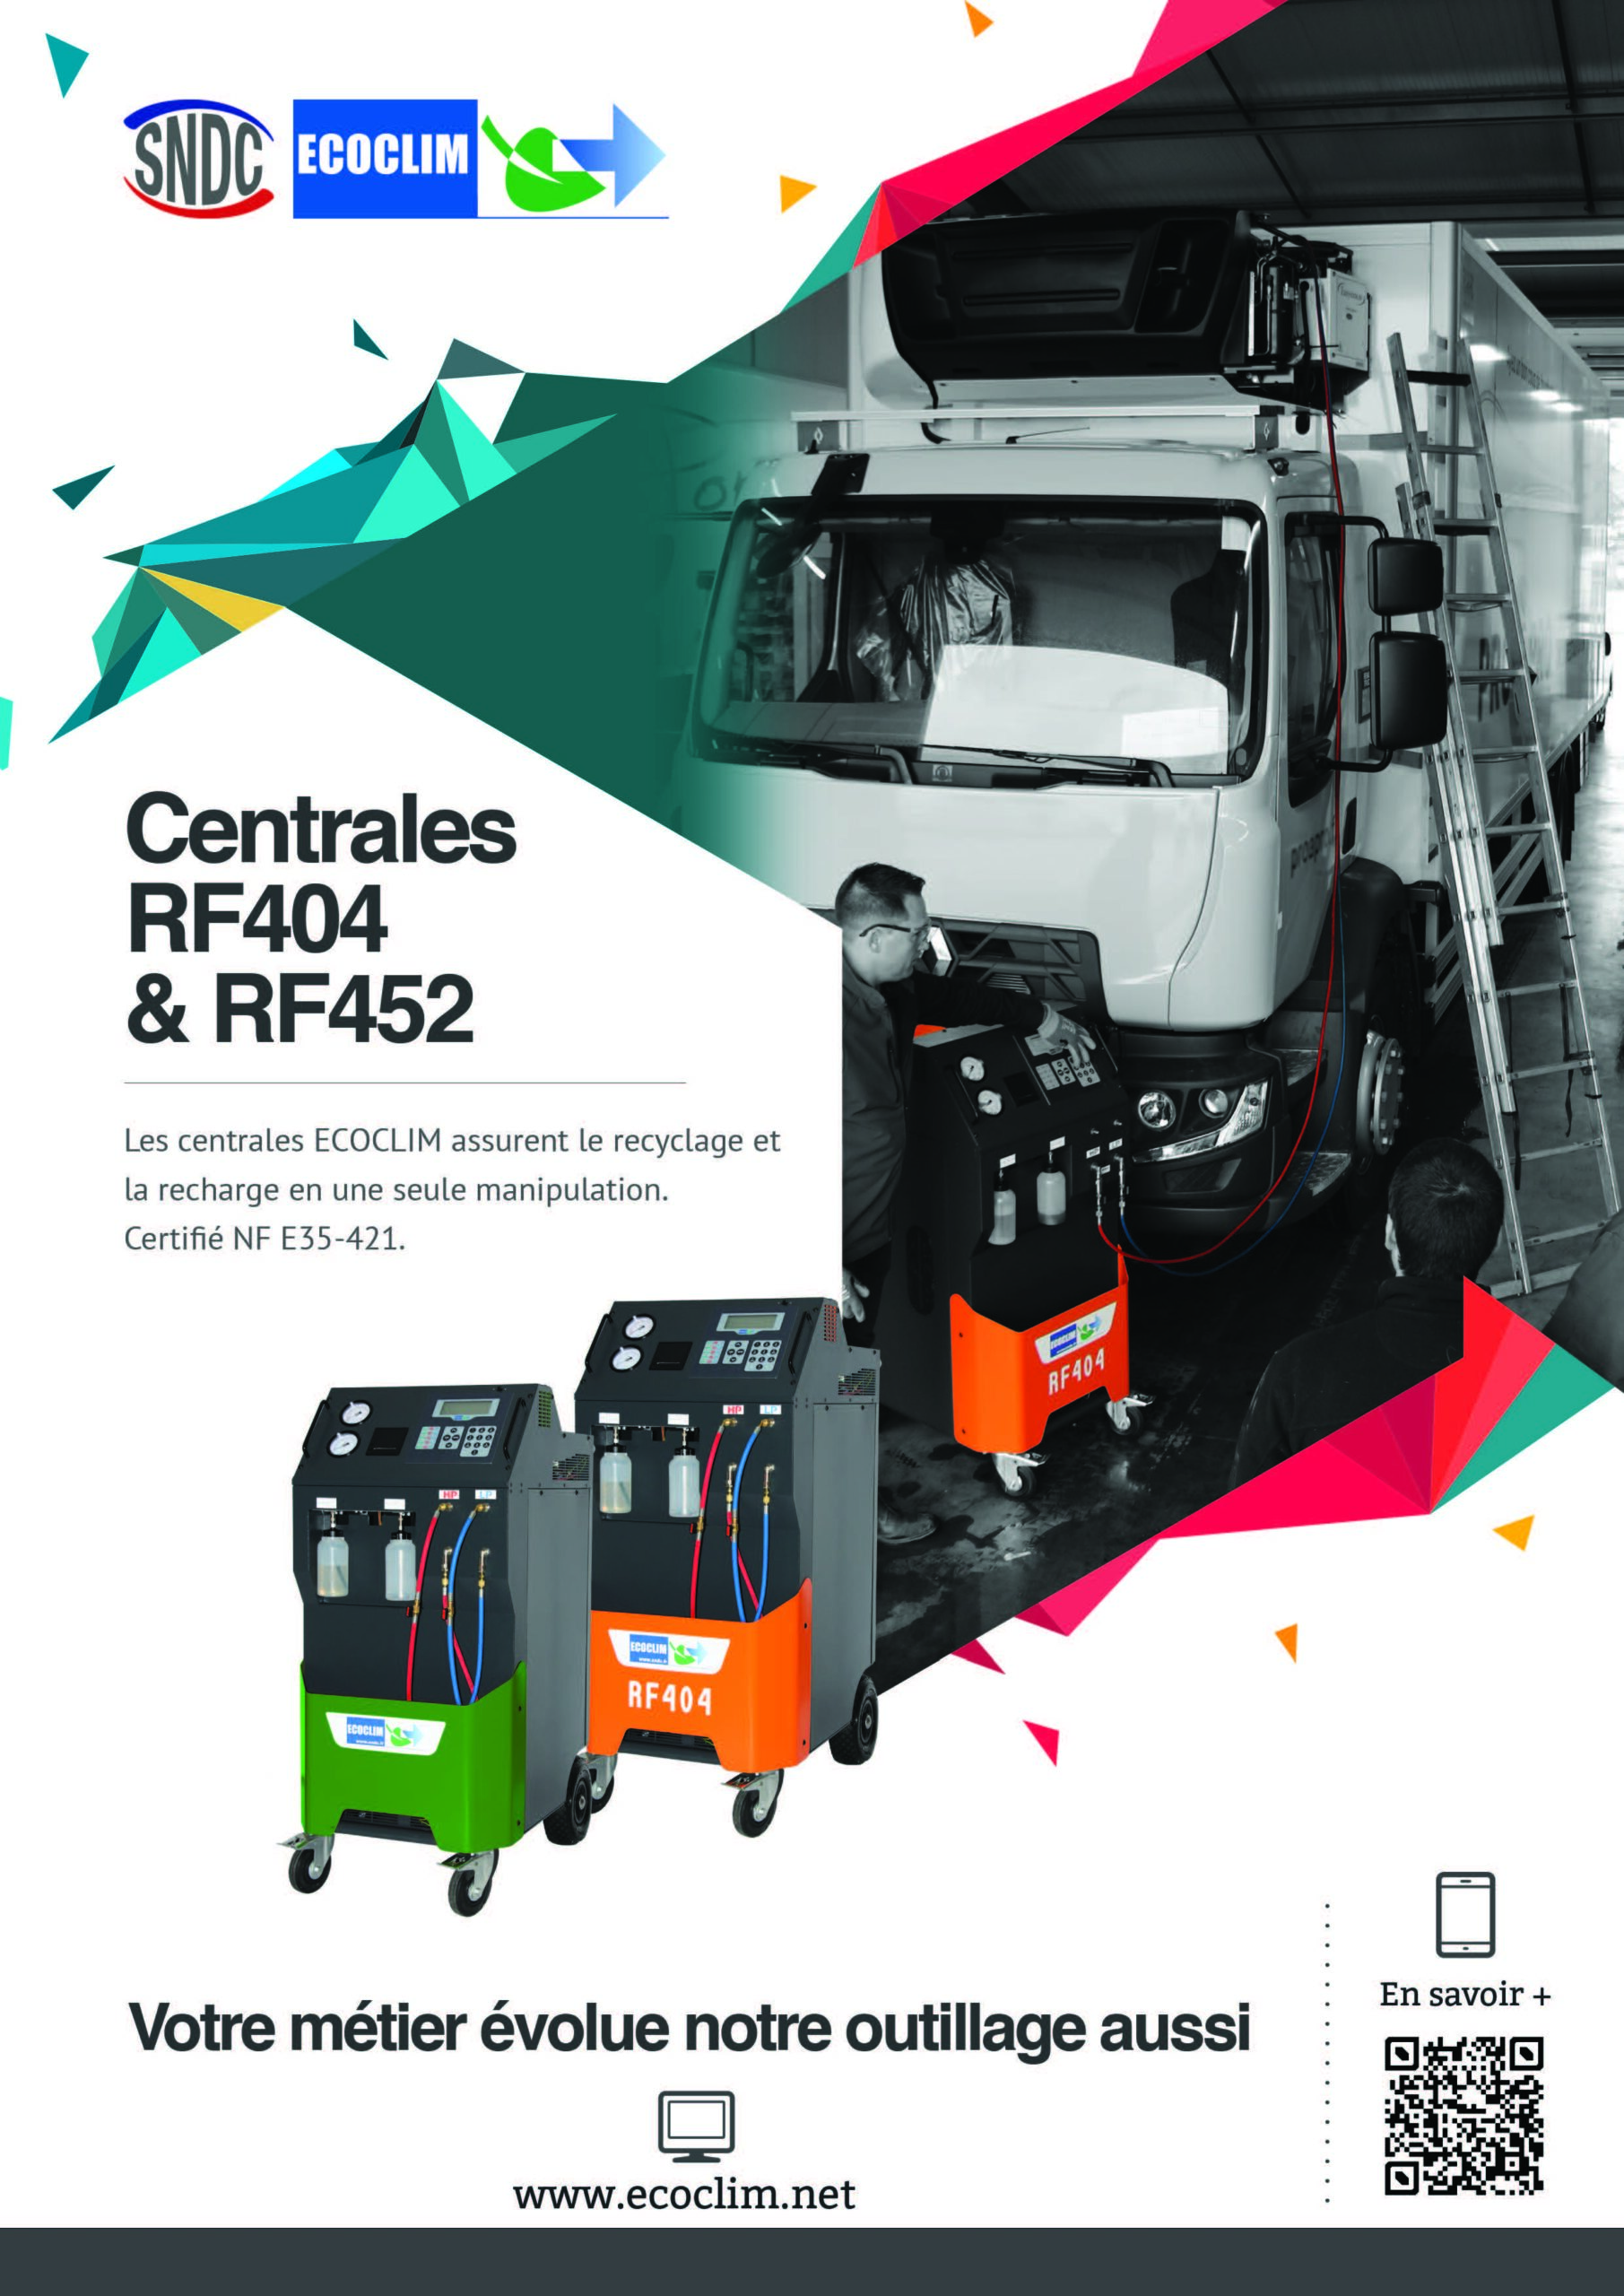 Centrales RF404 & RF452 - FROIDNEWS